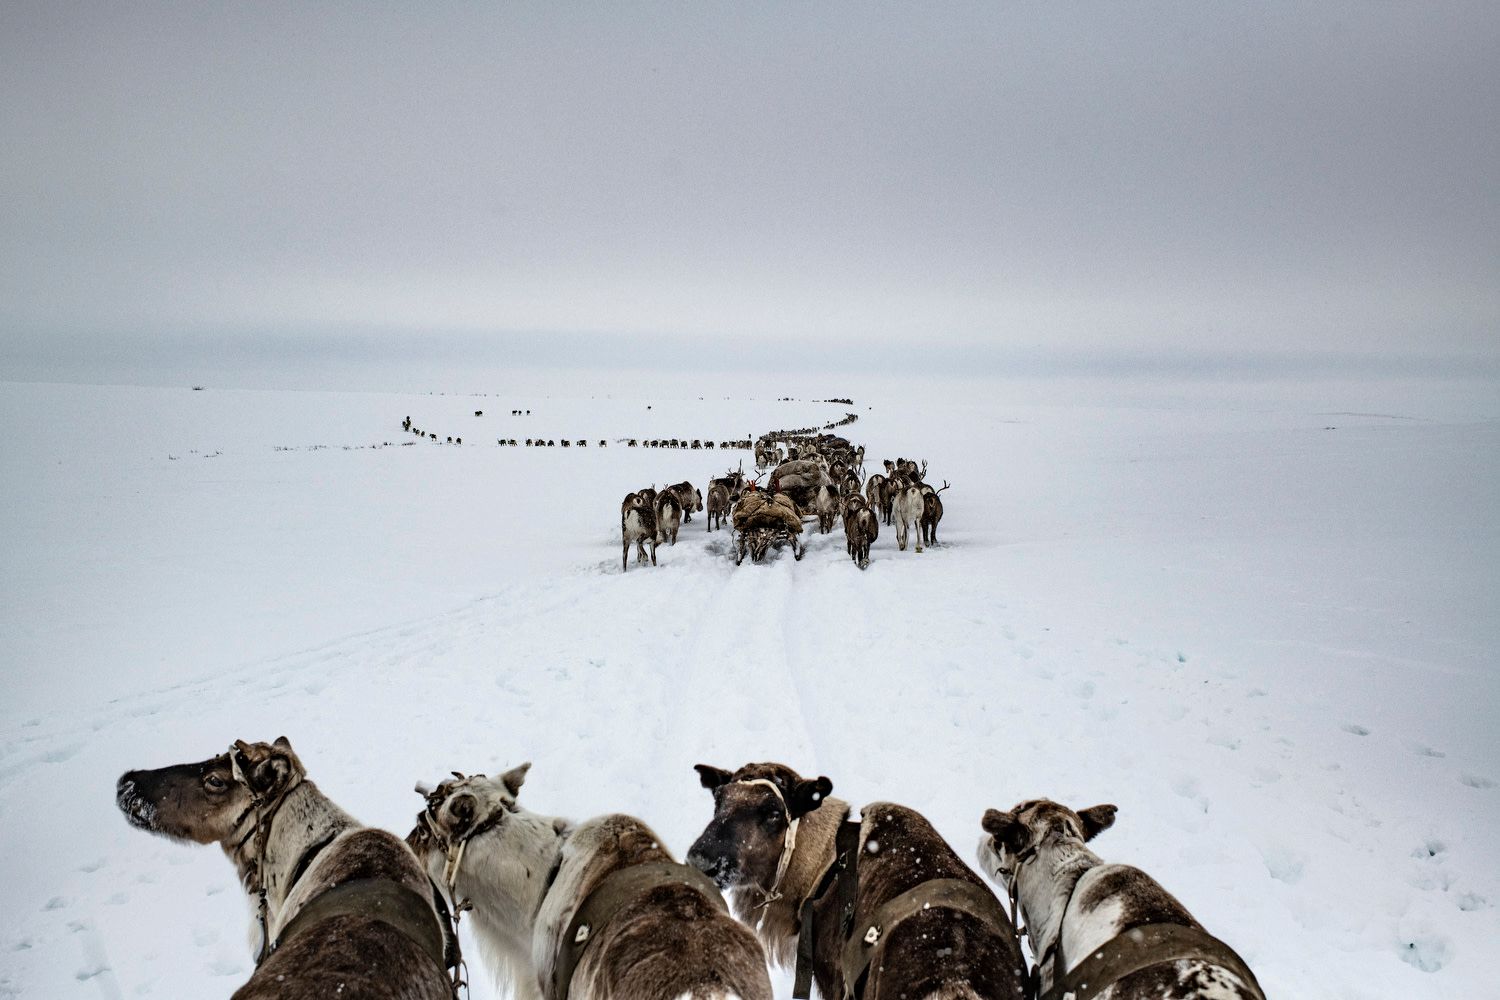 Yamal Peninsula, Yamalo-Nenets Autonomous Okrug, Russia, April 2018. The Serotetto nomadic herding family (officially the 8th Brigade of the Yar-sale state farm) moves its reindeers northward from winter pastures to summer pastures. The herds in the peninsula will usually range from 50 to 7,000 heads and the migration pattern depends on seasons and on the sustainability of lichen pastures.